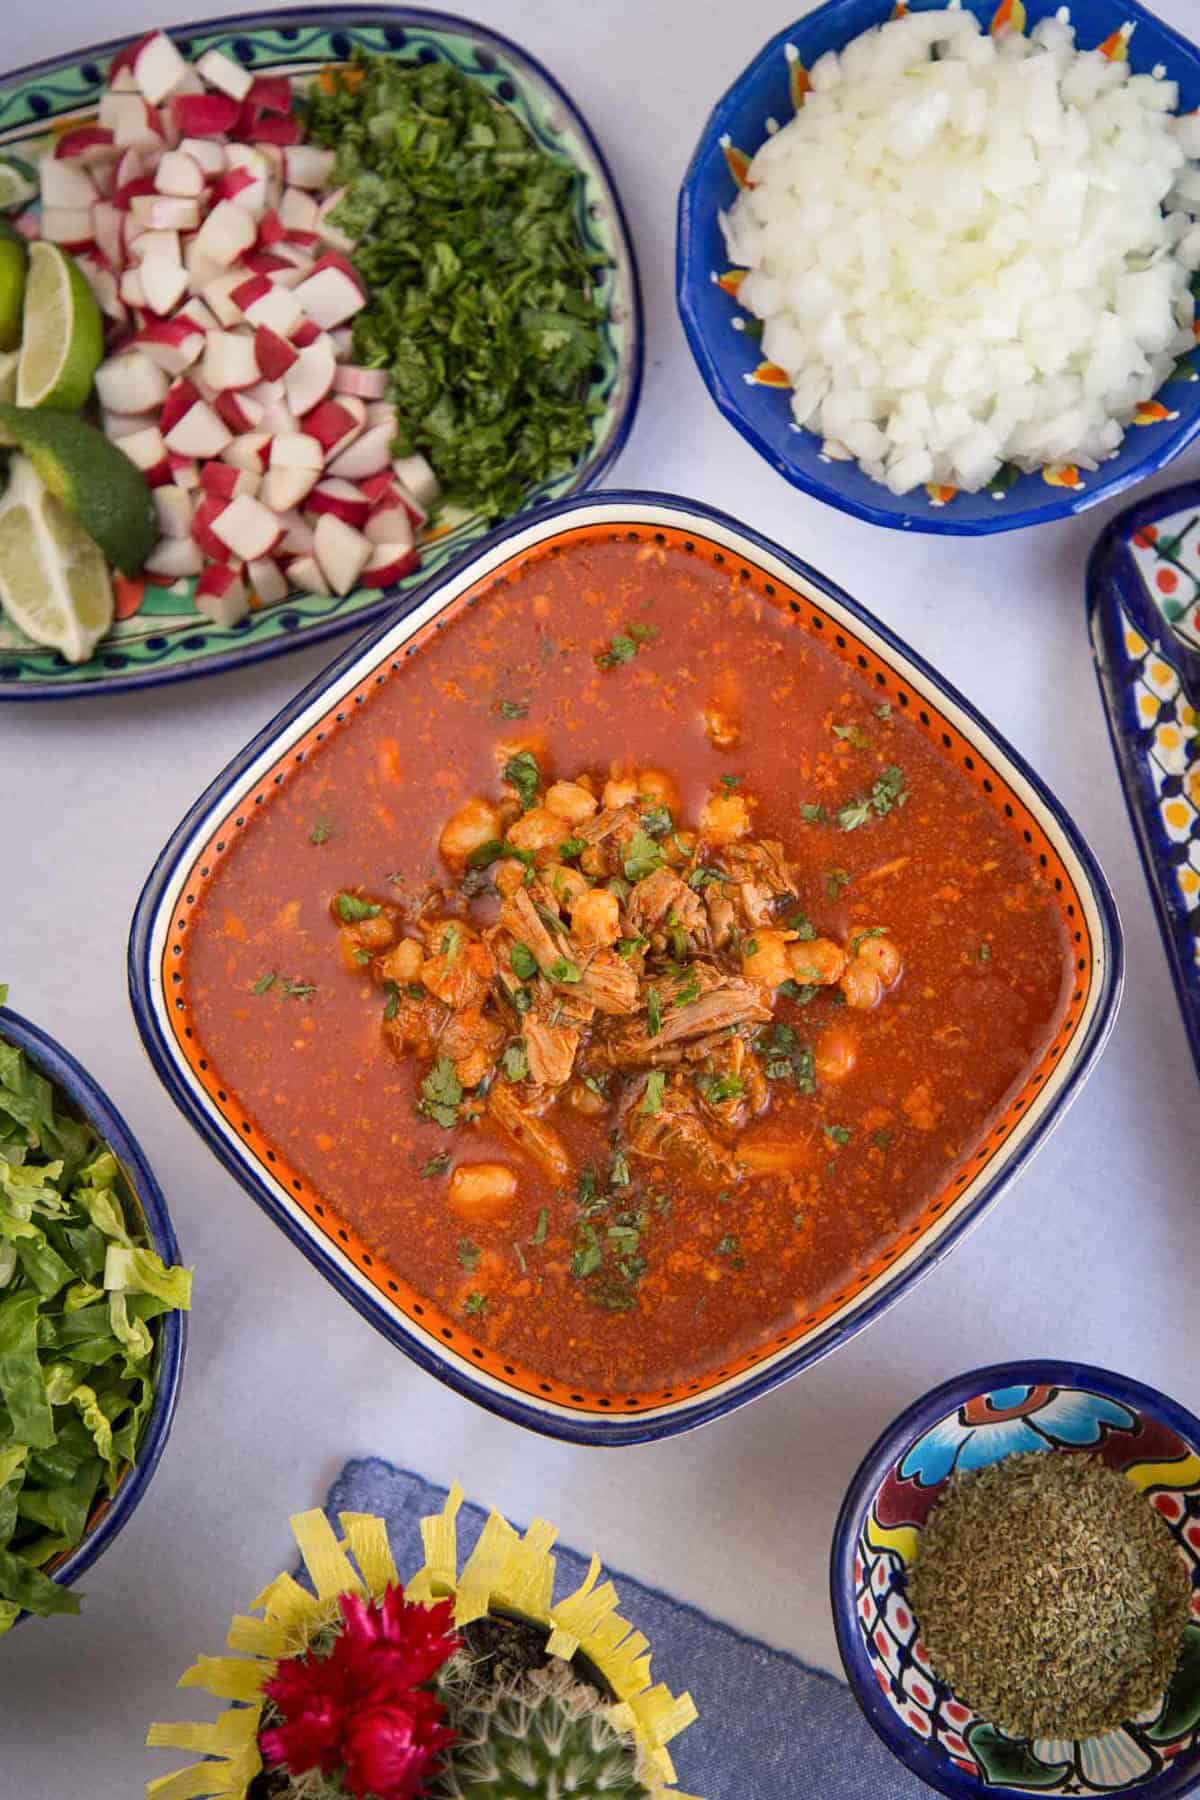 large bowl of red pozole surrounded by dishes of toppings including chopped white onion, radish, shredded lettuce, and lime slices.